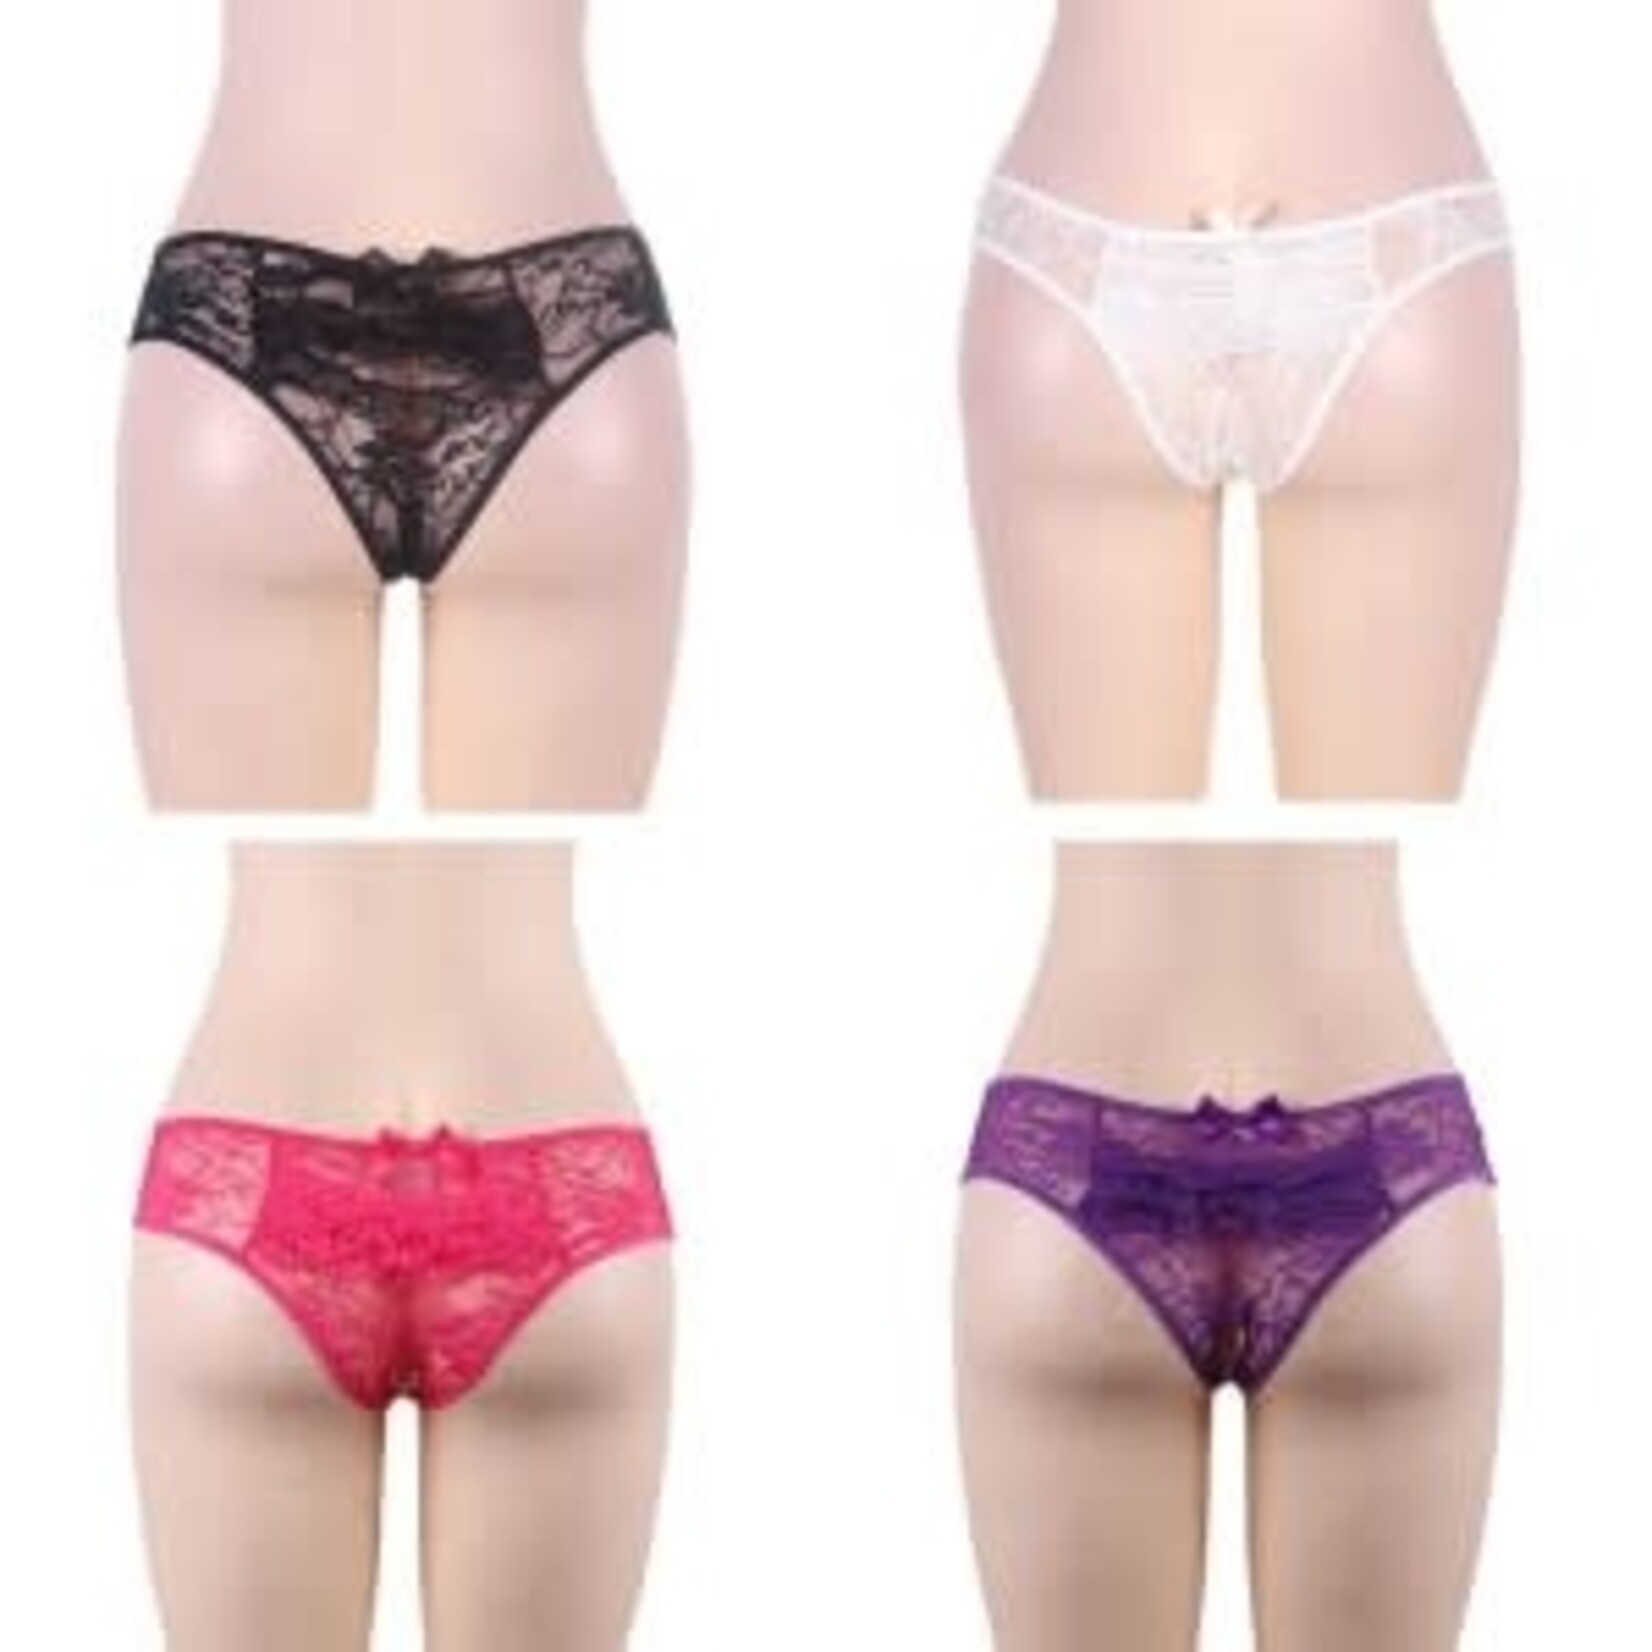 OH YEAH! -  OPEN CROTCH FLORAL LACE PANTY 4IN1 BOX XS-S